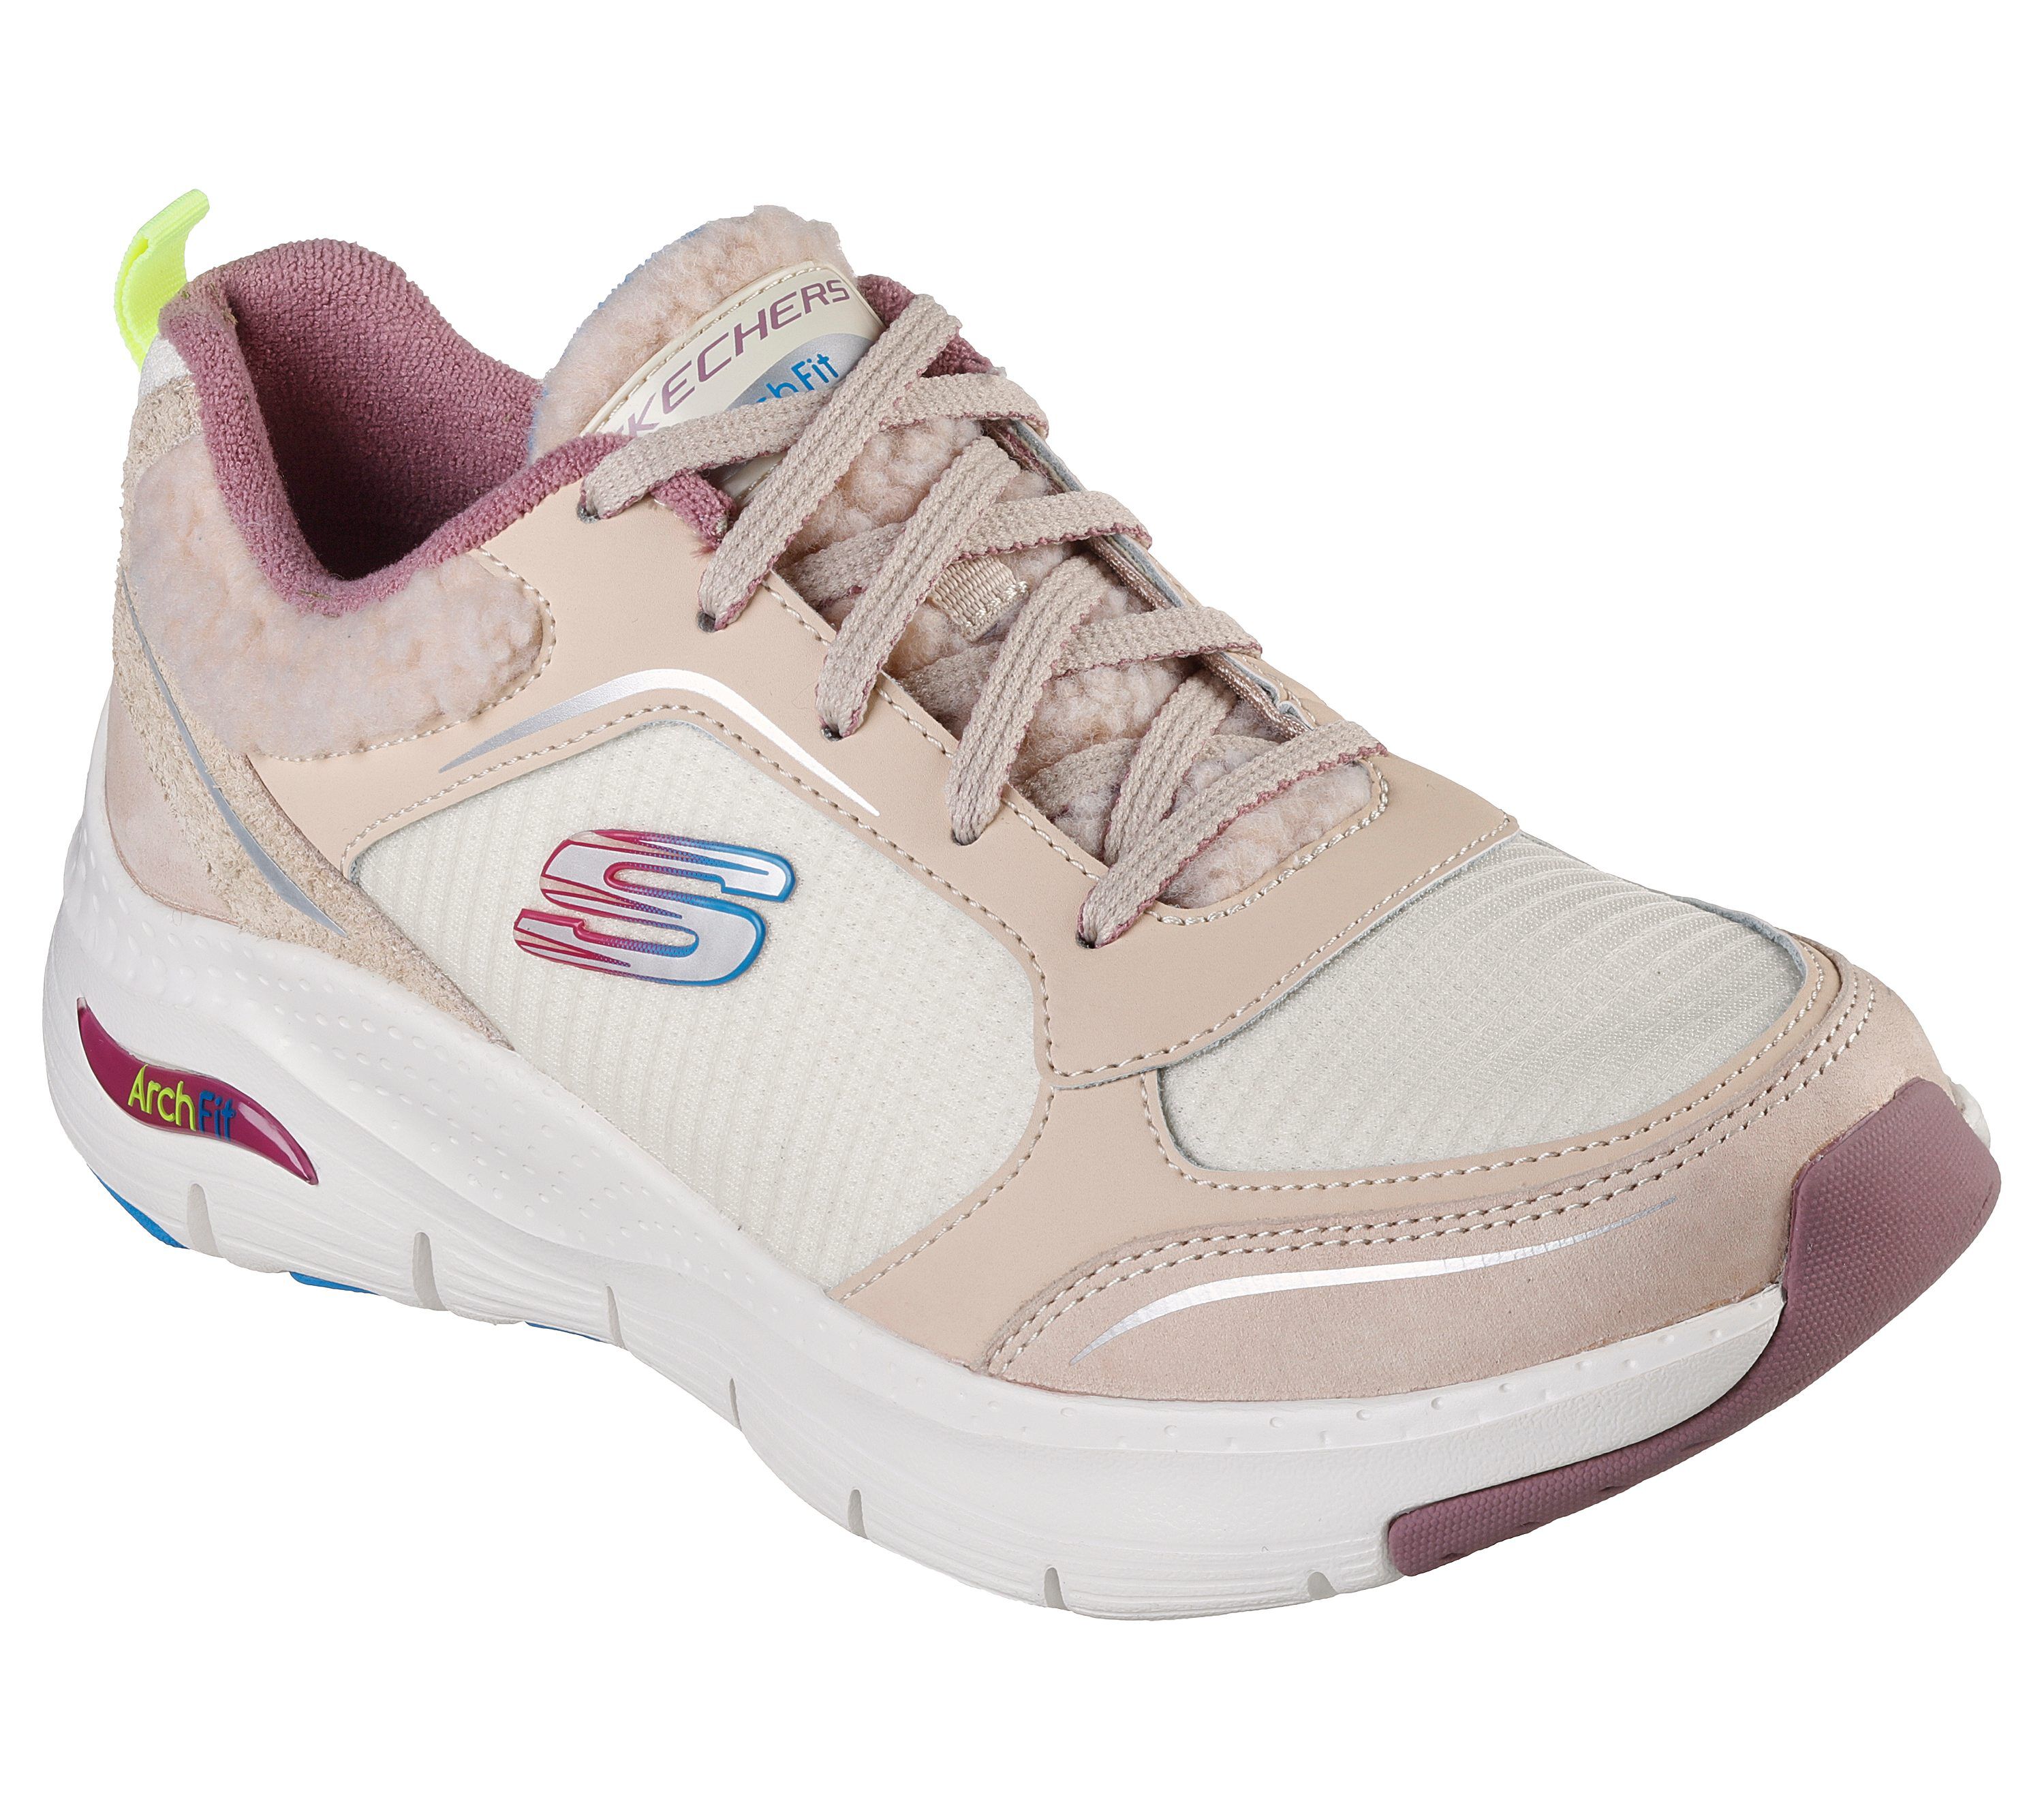 skechers womens shoes images